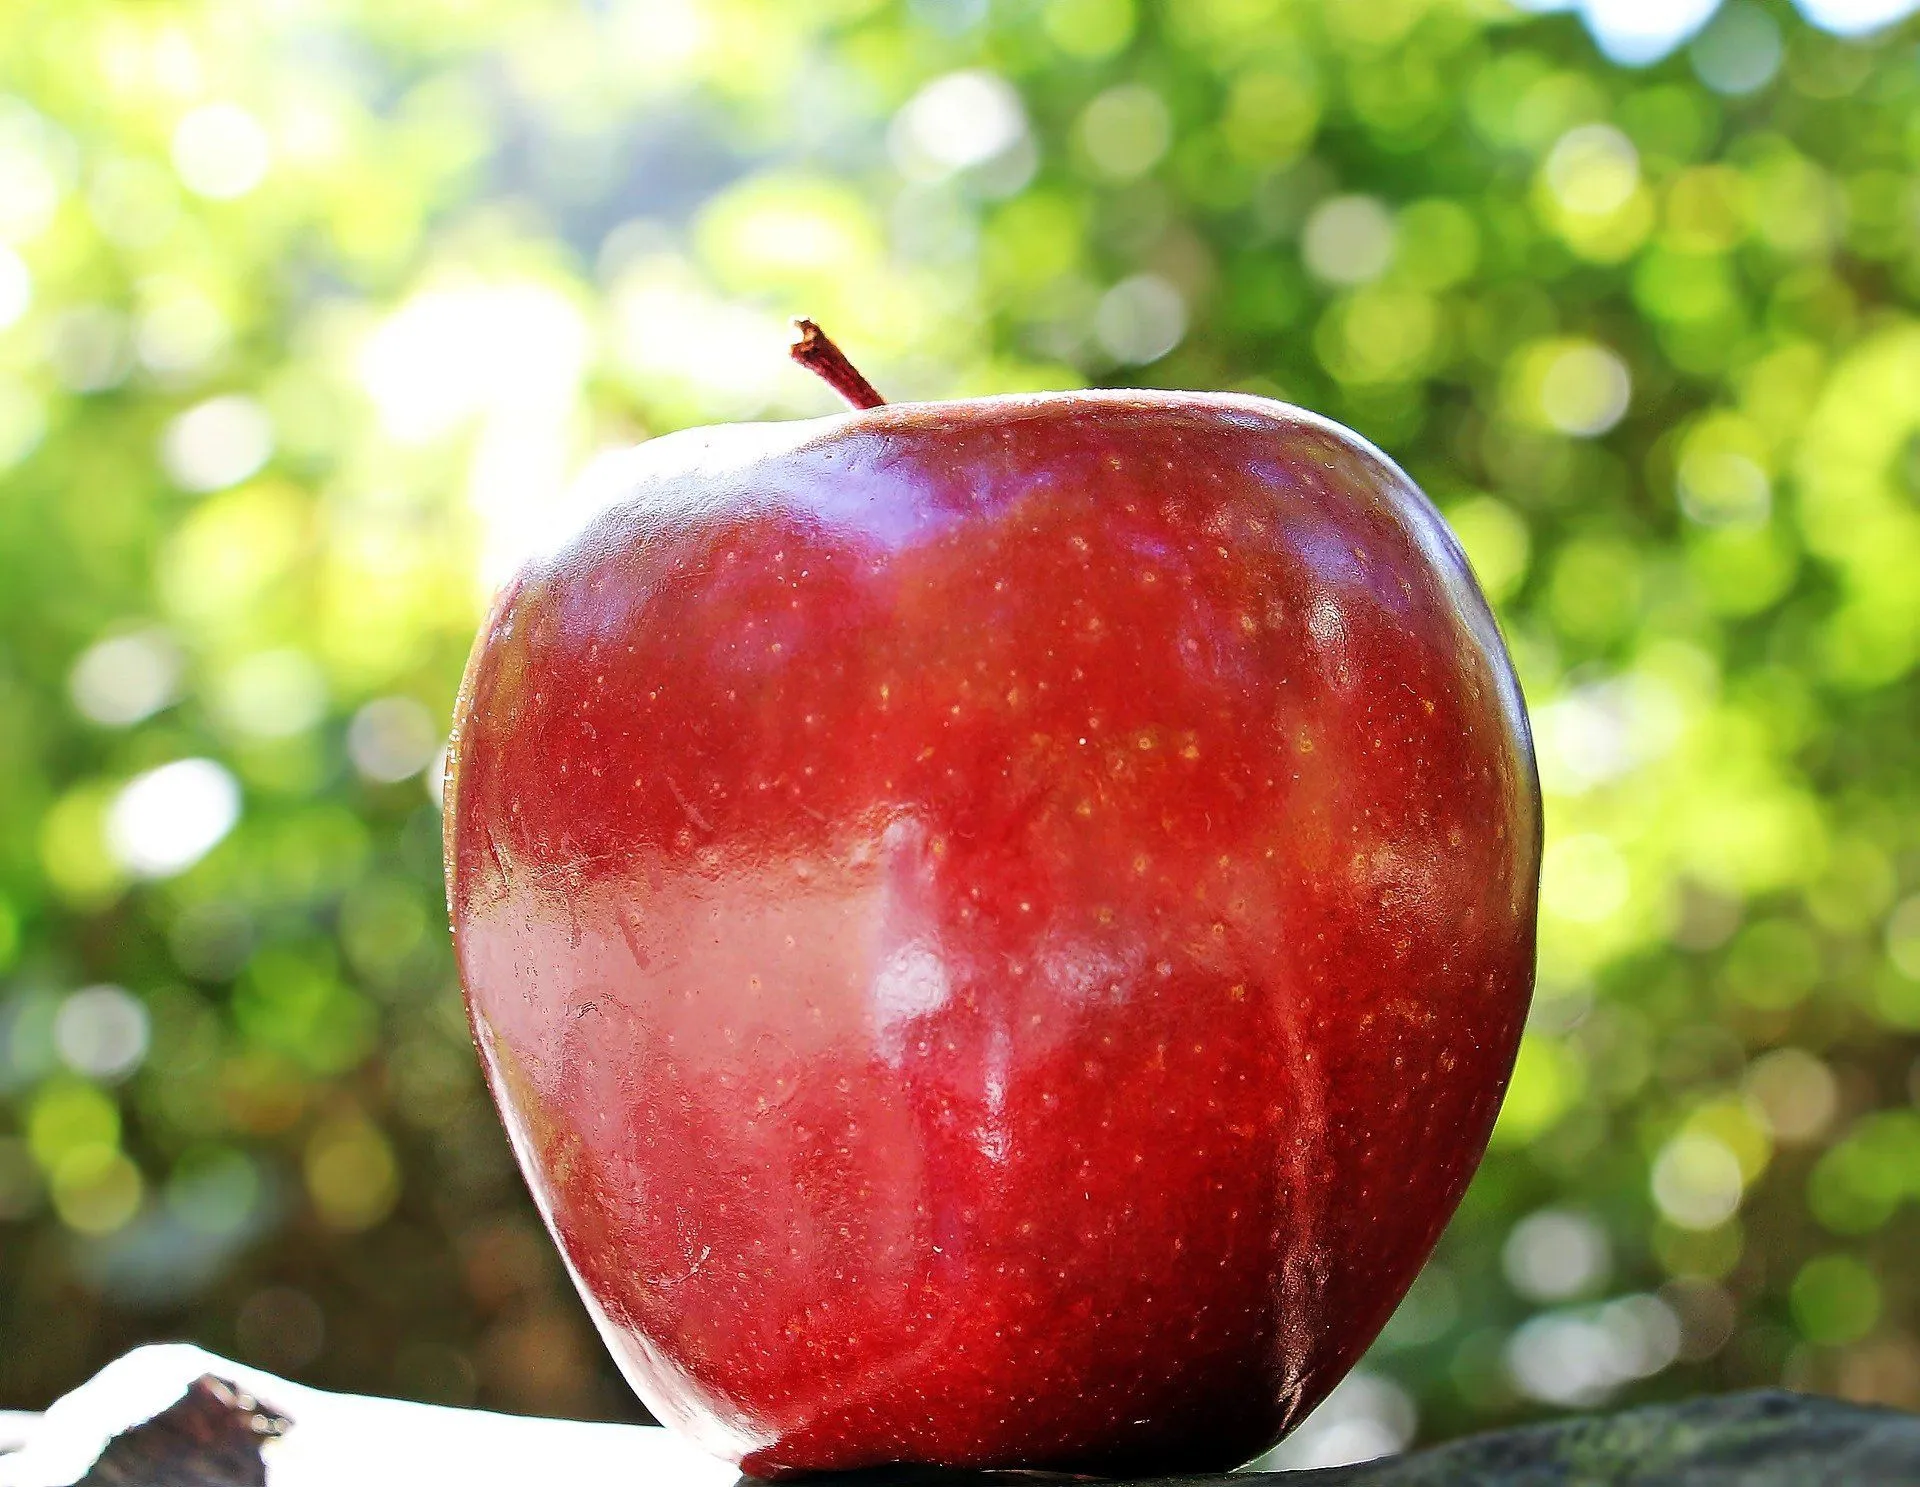 Hokuto Apple carry excellent flavors, courtesy of its crossbred including two leading apple varieties.